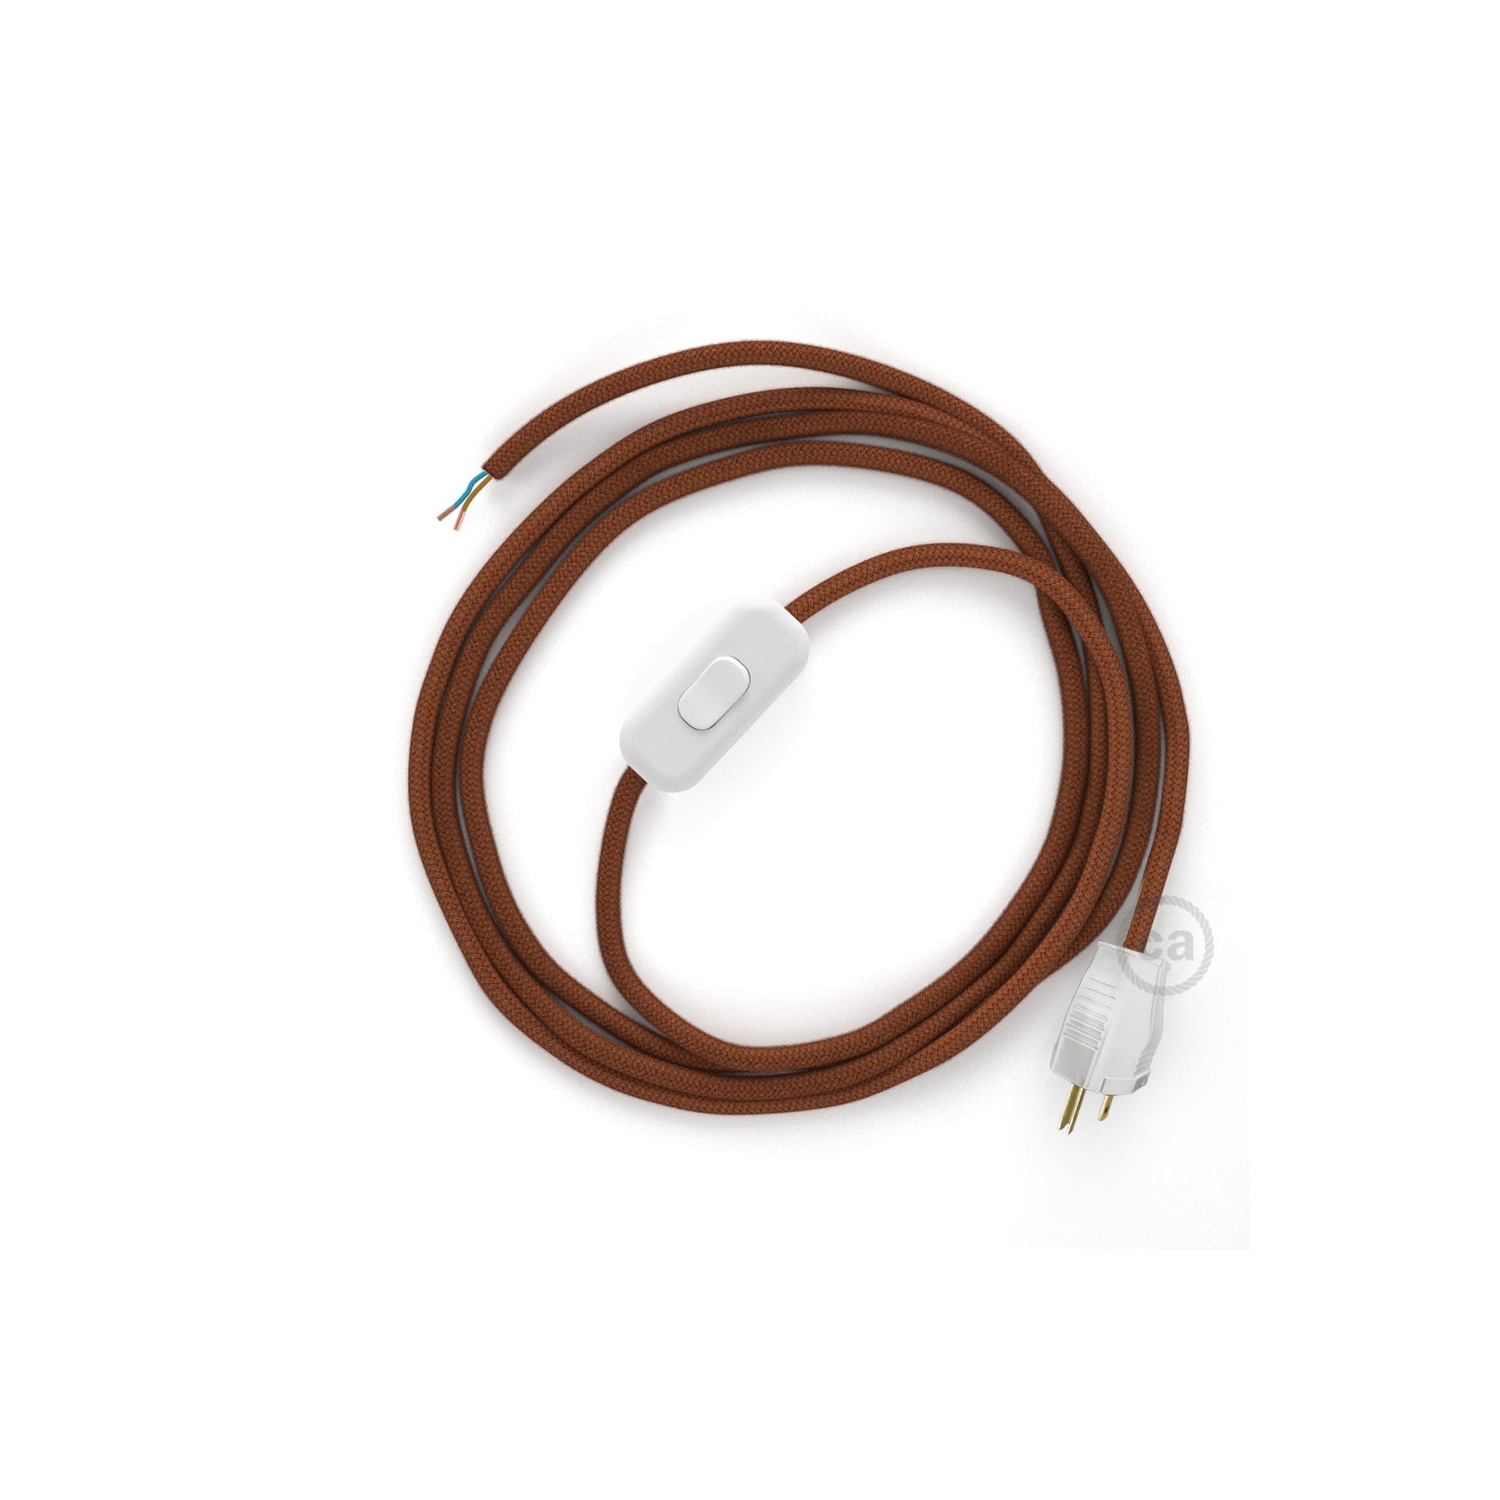 Power Cord with in-line switch, RC23 Rust Cotton - Choose color of switch/plug